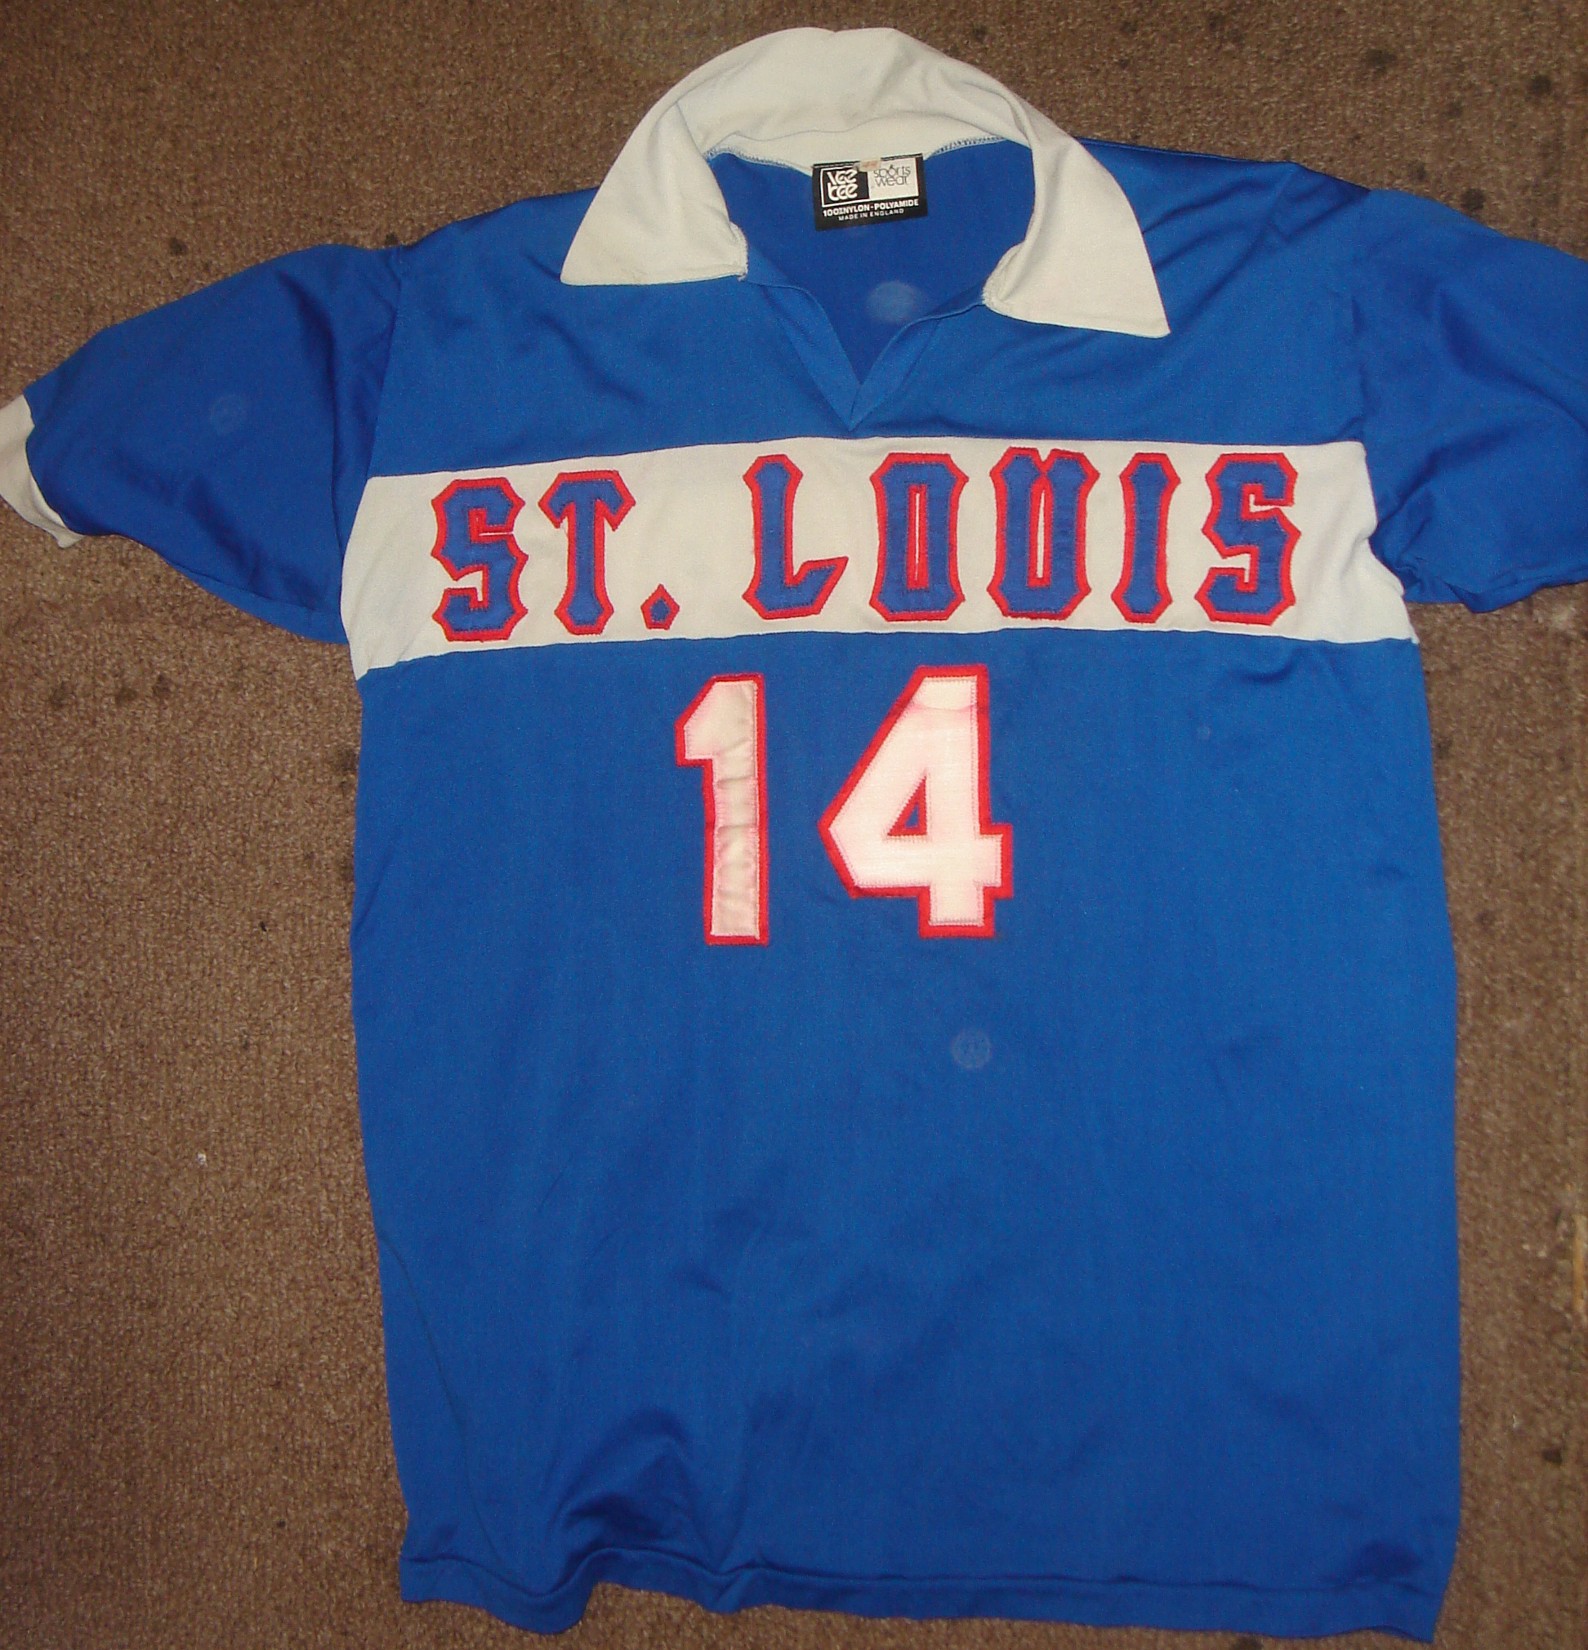 Team-Issued Stars Jersey & Pants: #94 (STL @ KC 9/22/20) - Size 48